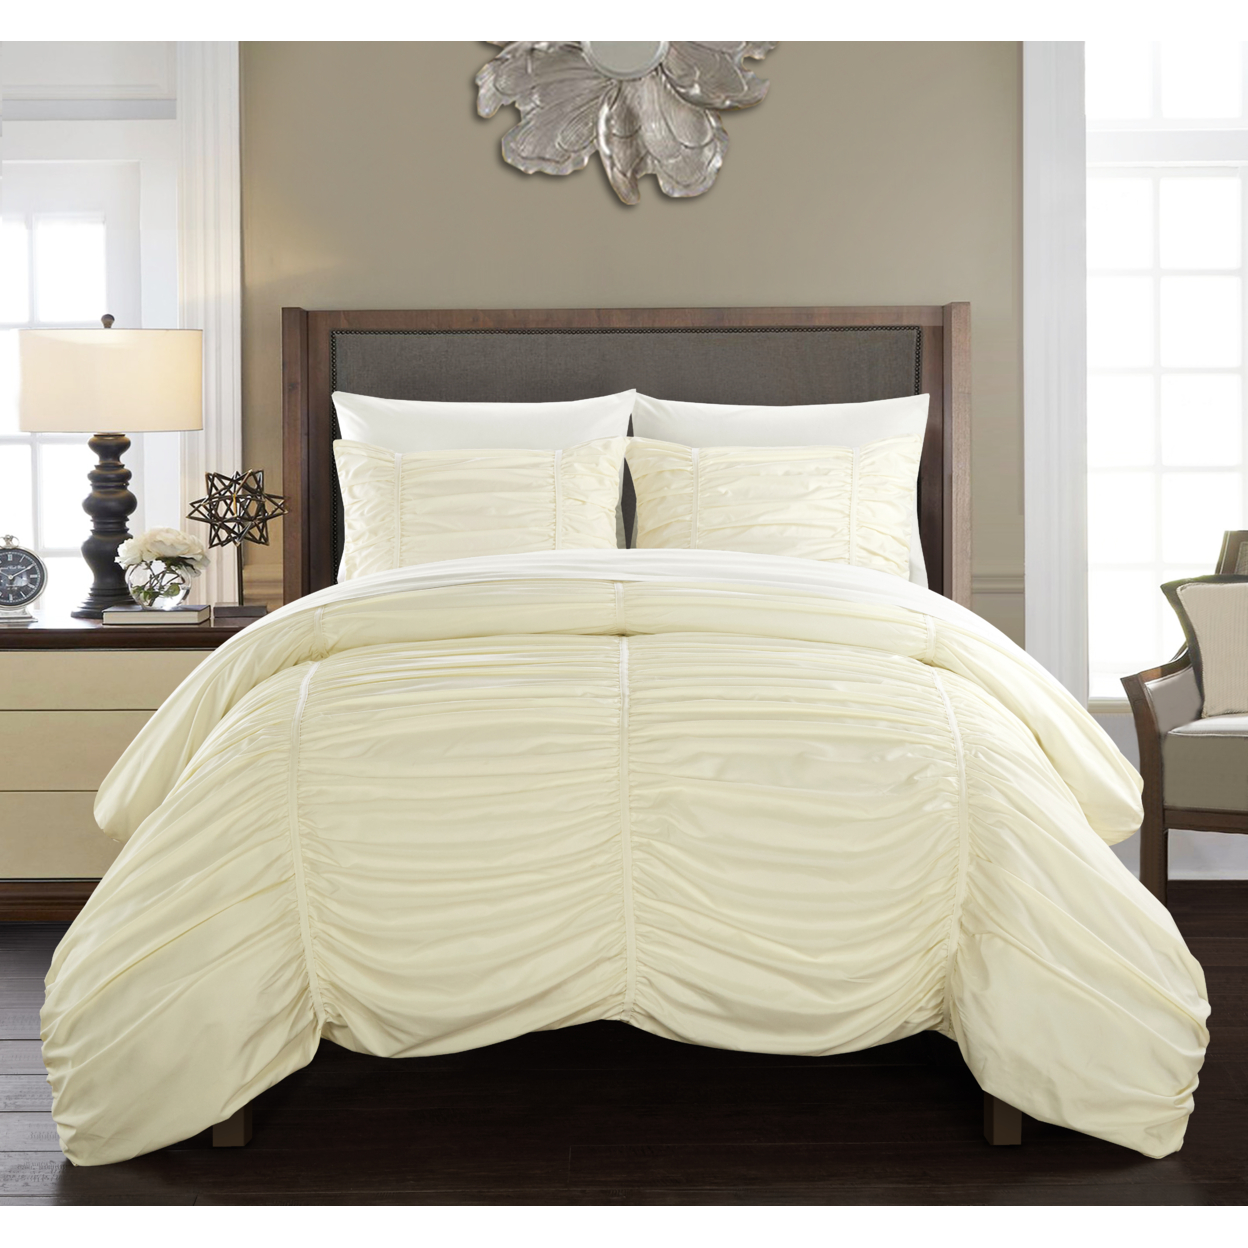 Kiela 2 Pc Or 3 Pc Ruched Comforter Set - Coral, King